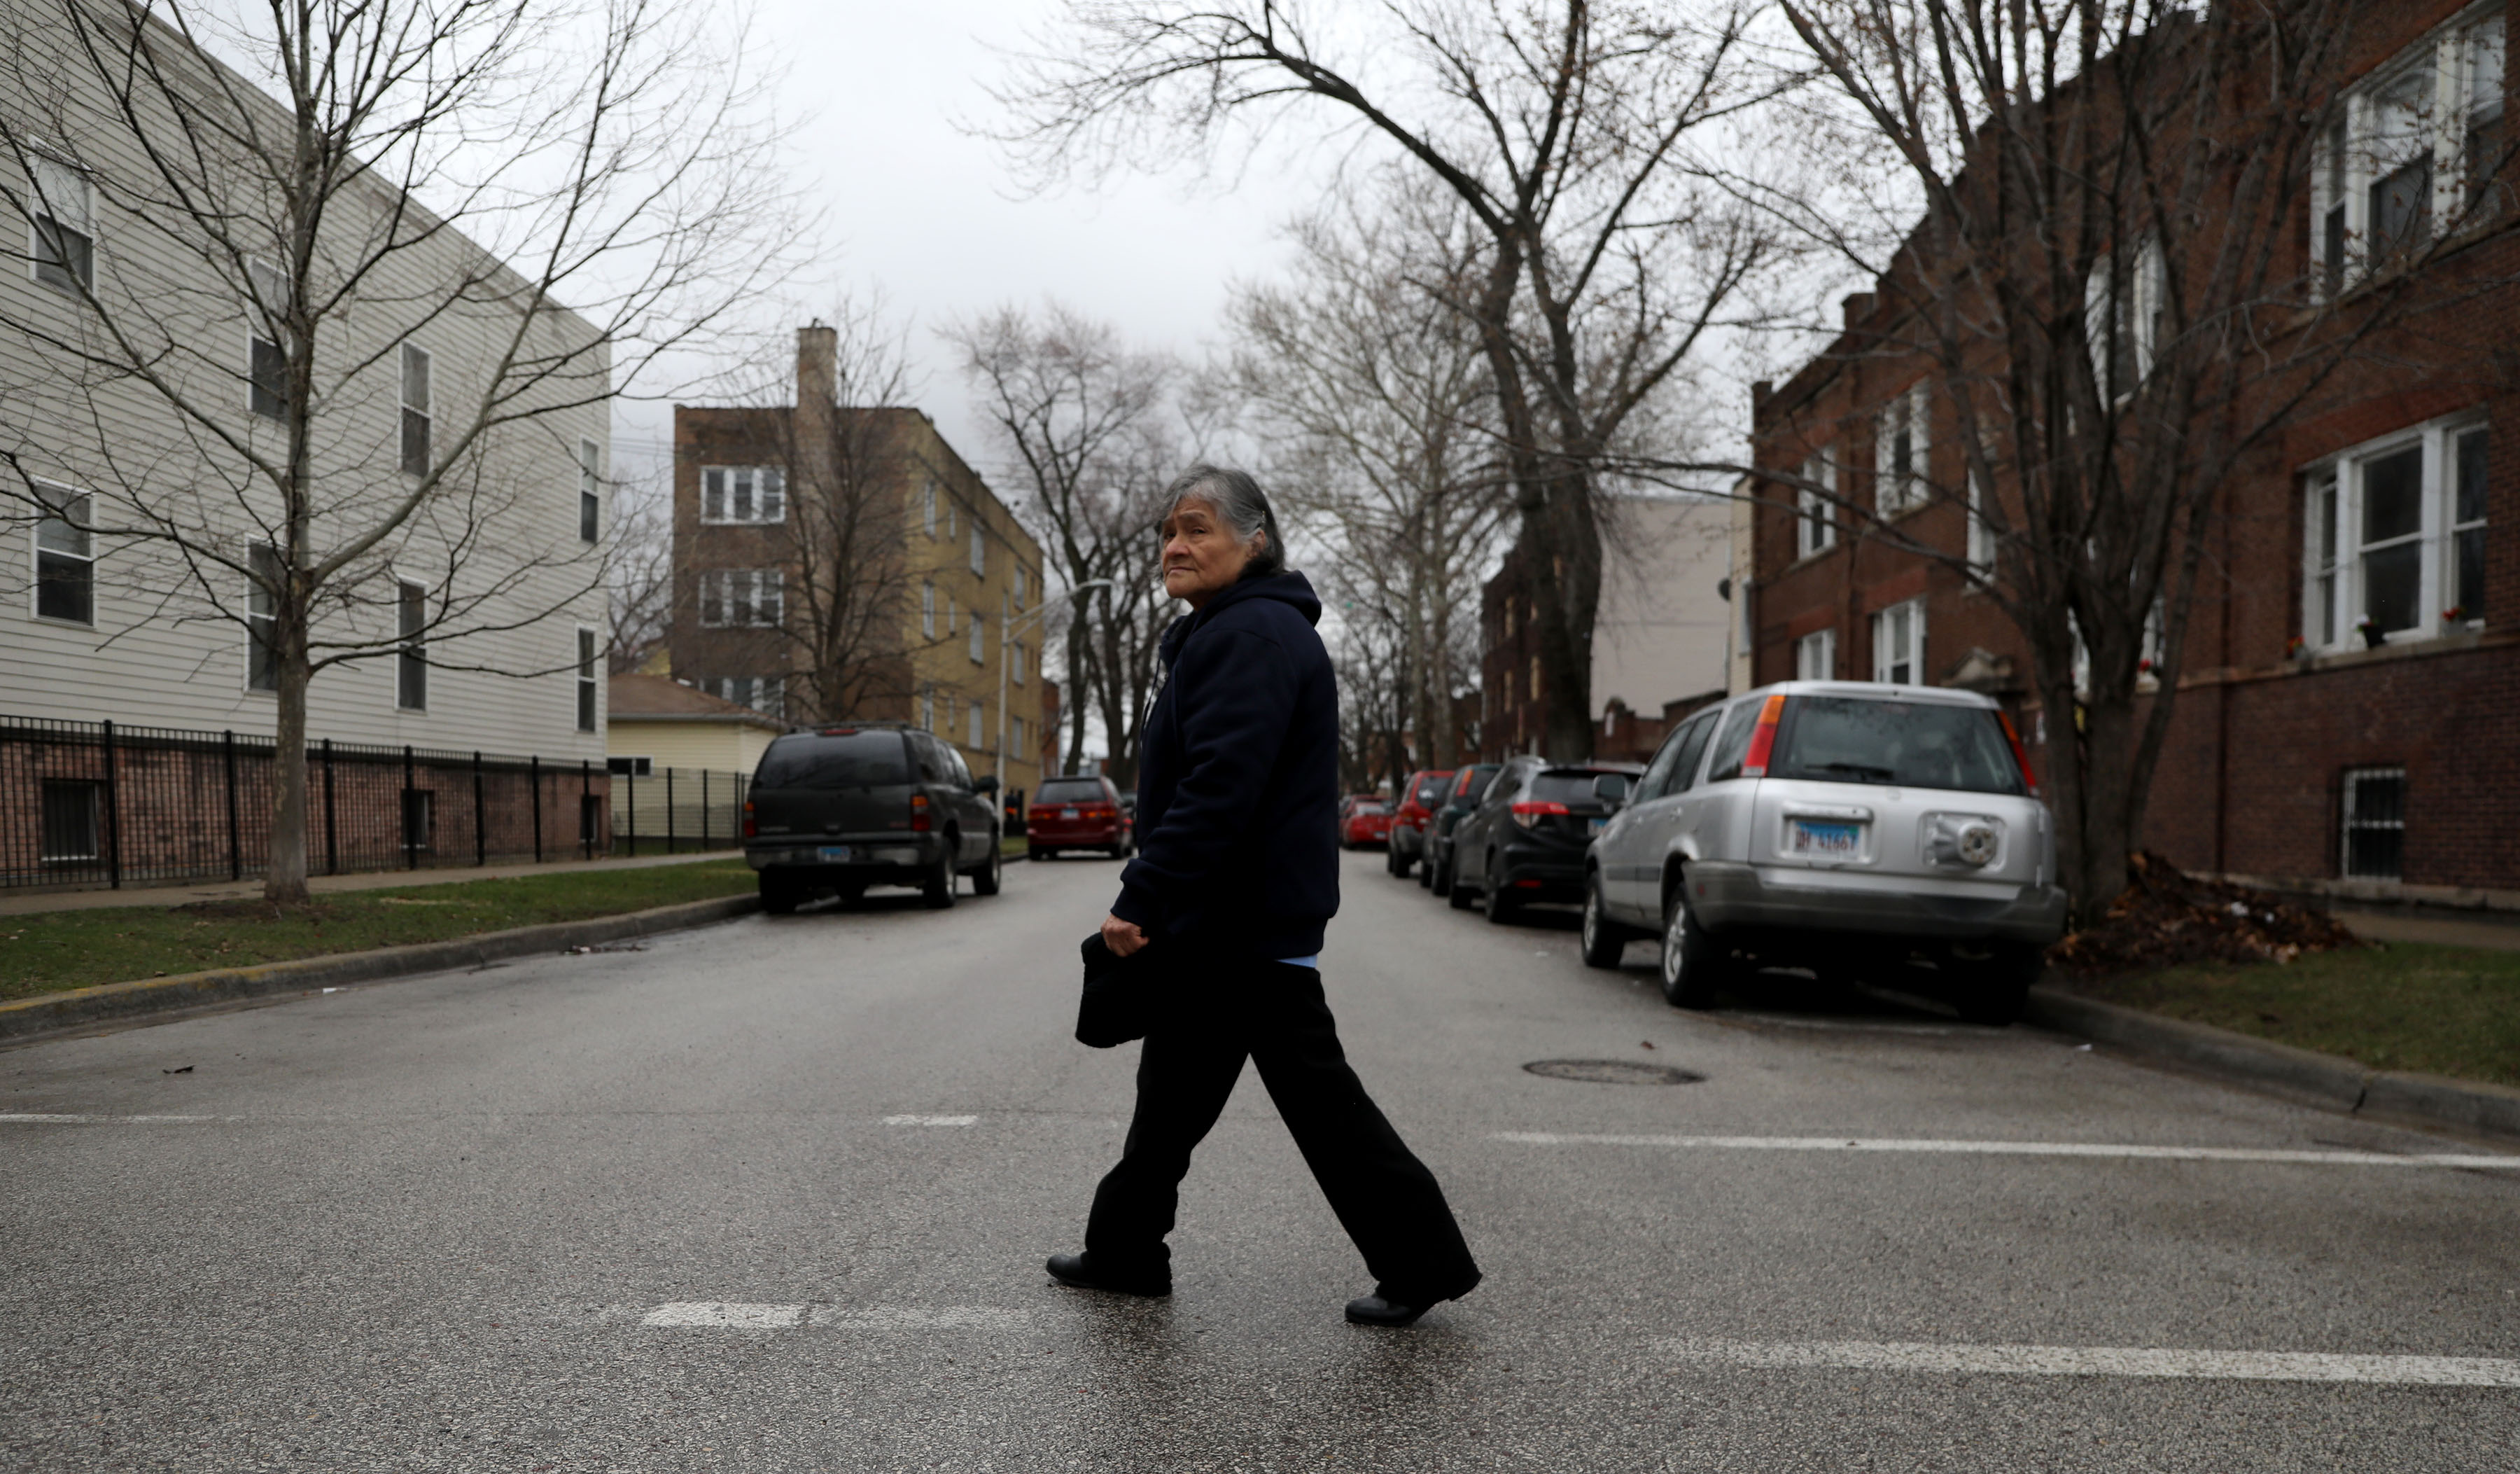 A woman walks across a residential street. She's wearing a winter coat and black pants.